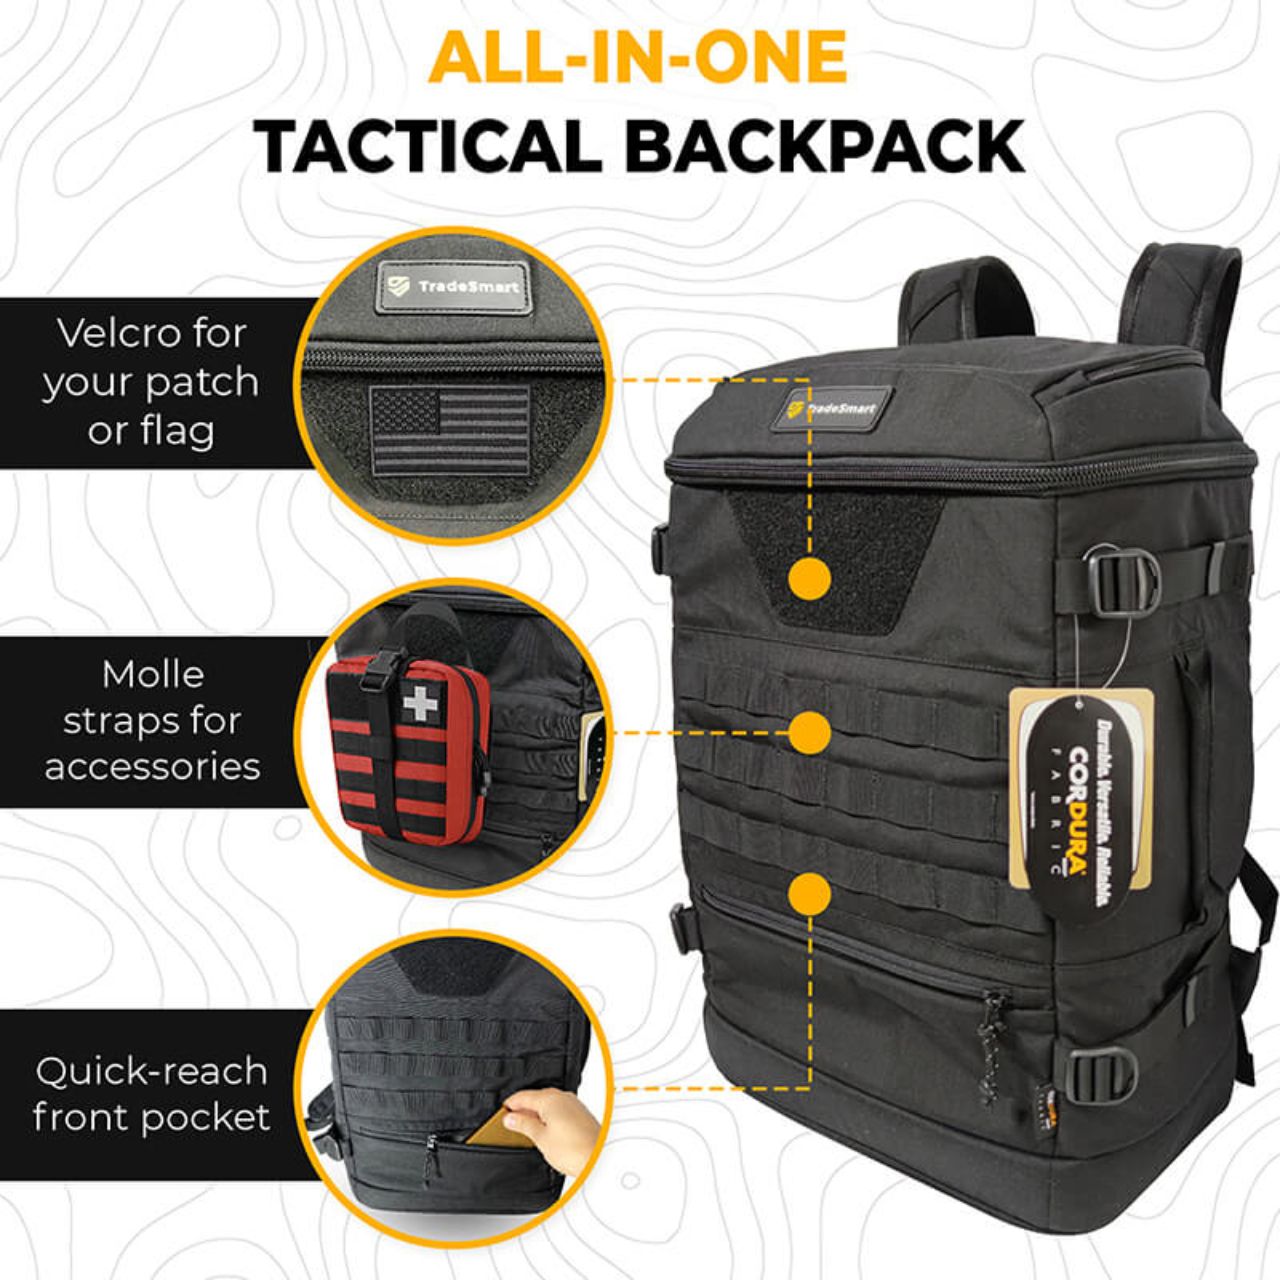 All-In-One Tactical Backpack has multiple features